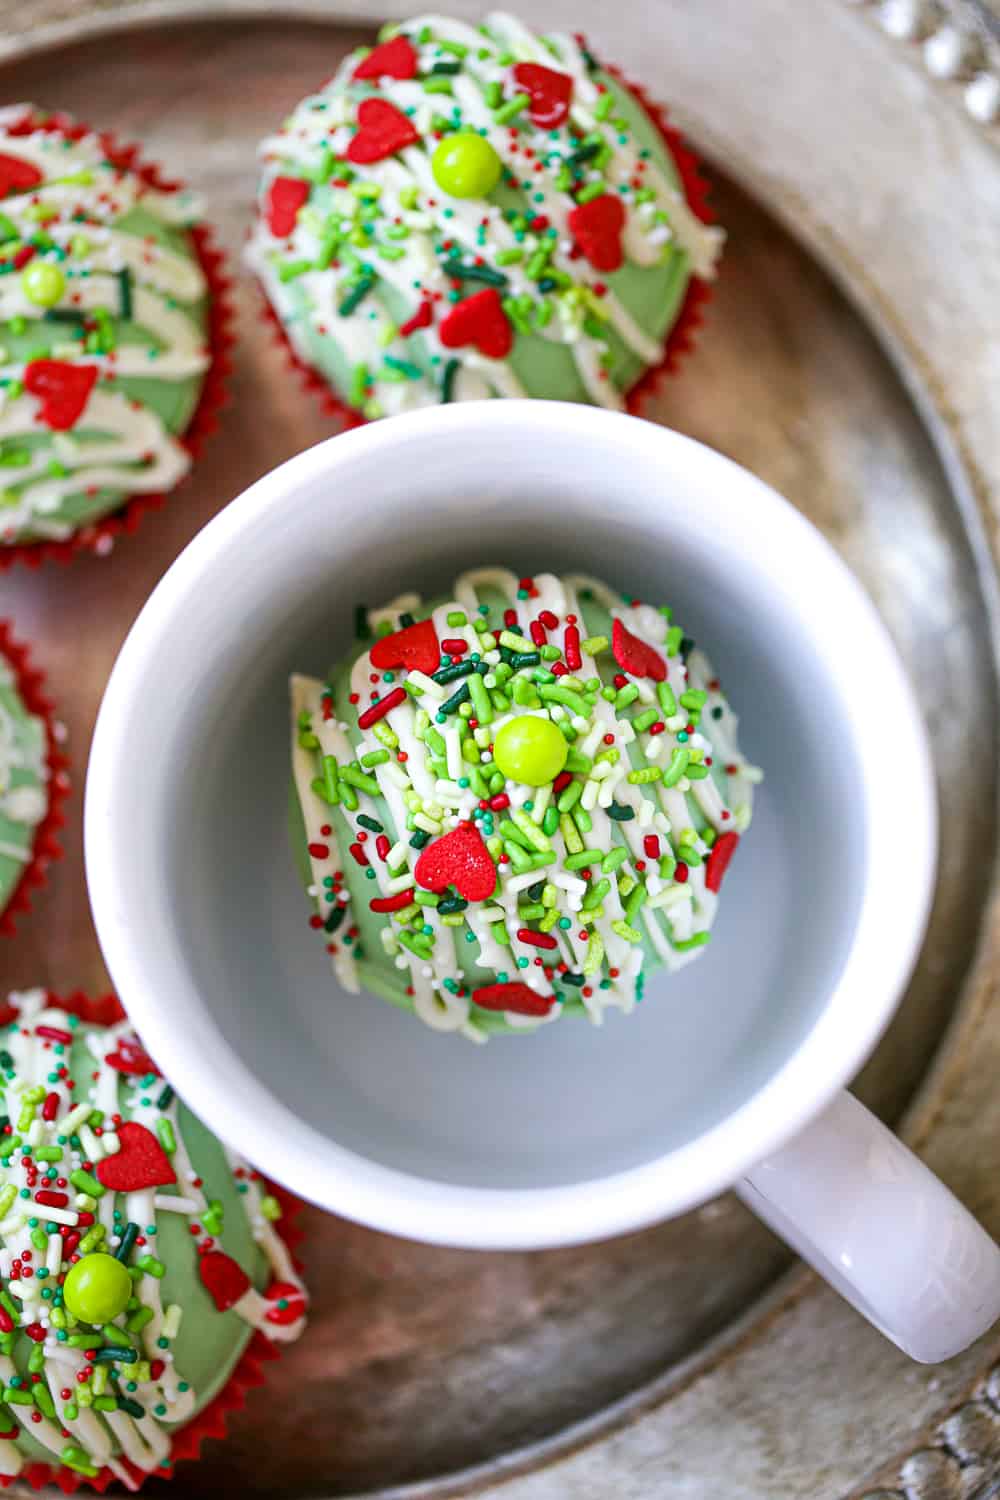 Grinch Cocoa Bombs in a cup